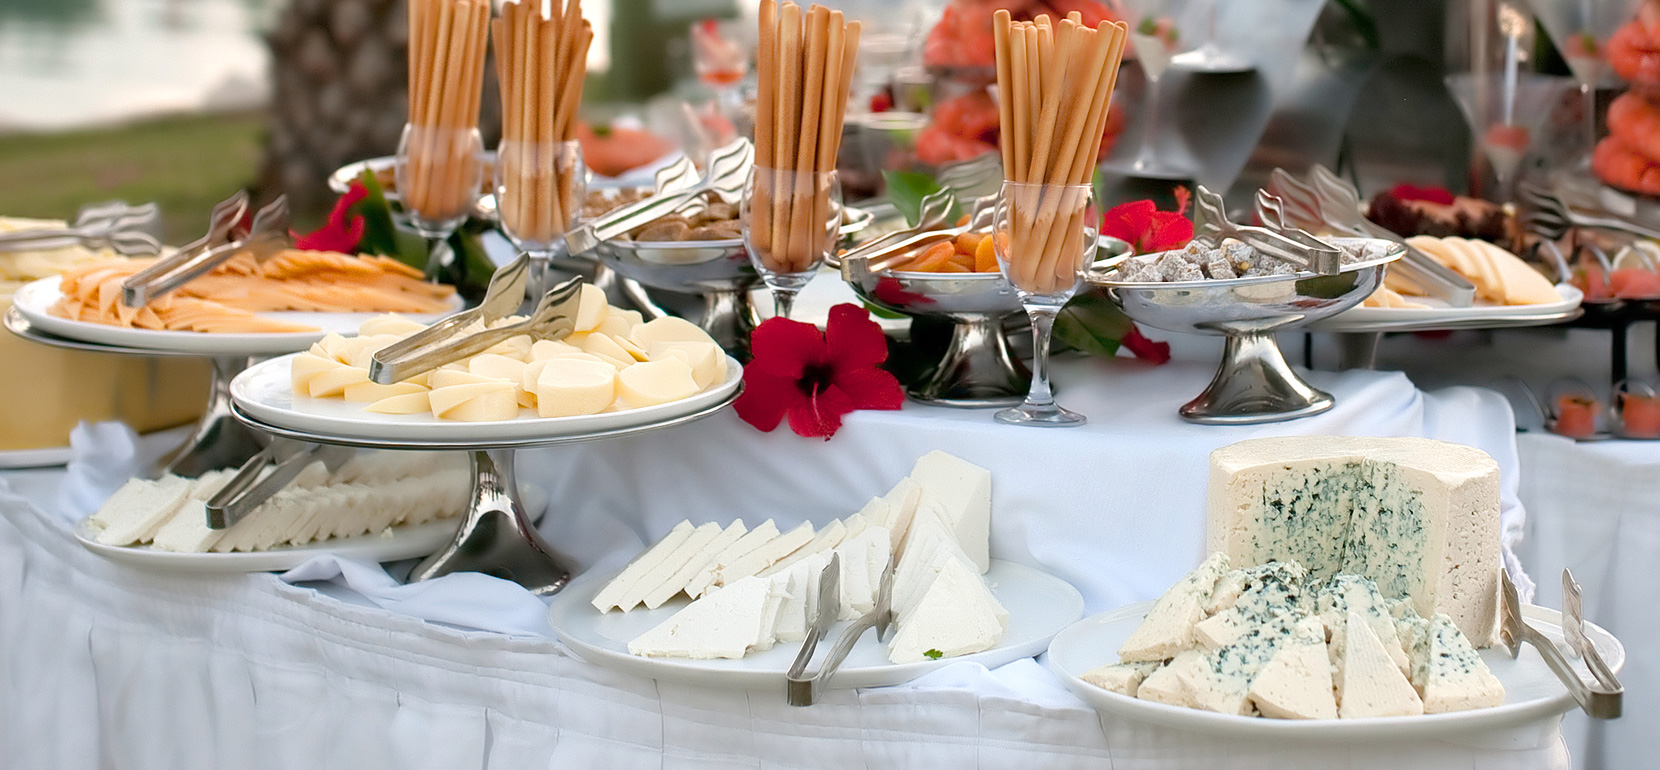 Catering Services - Maryland Brunch Catering